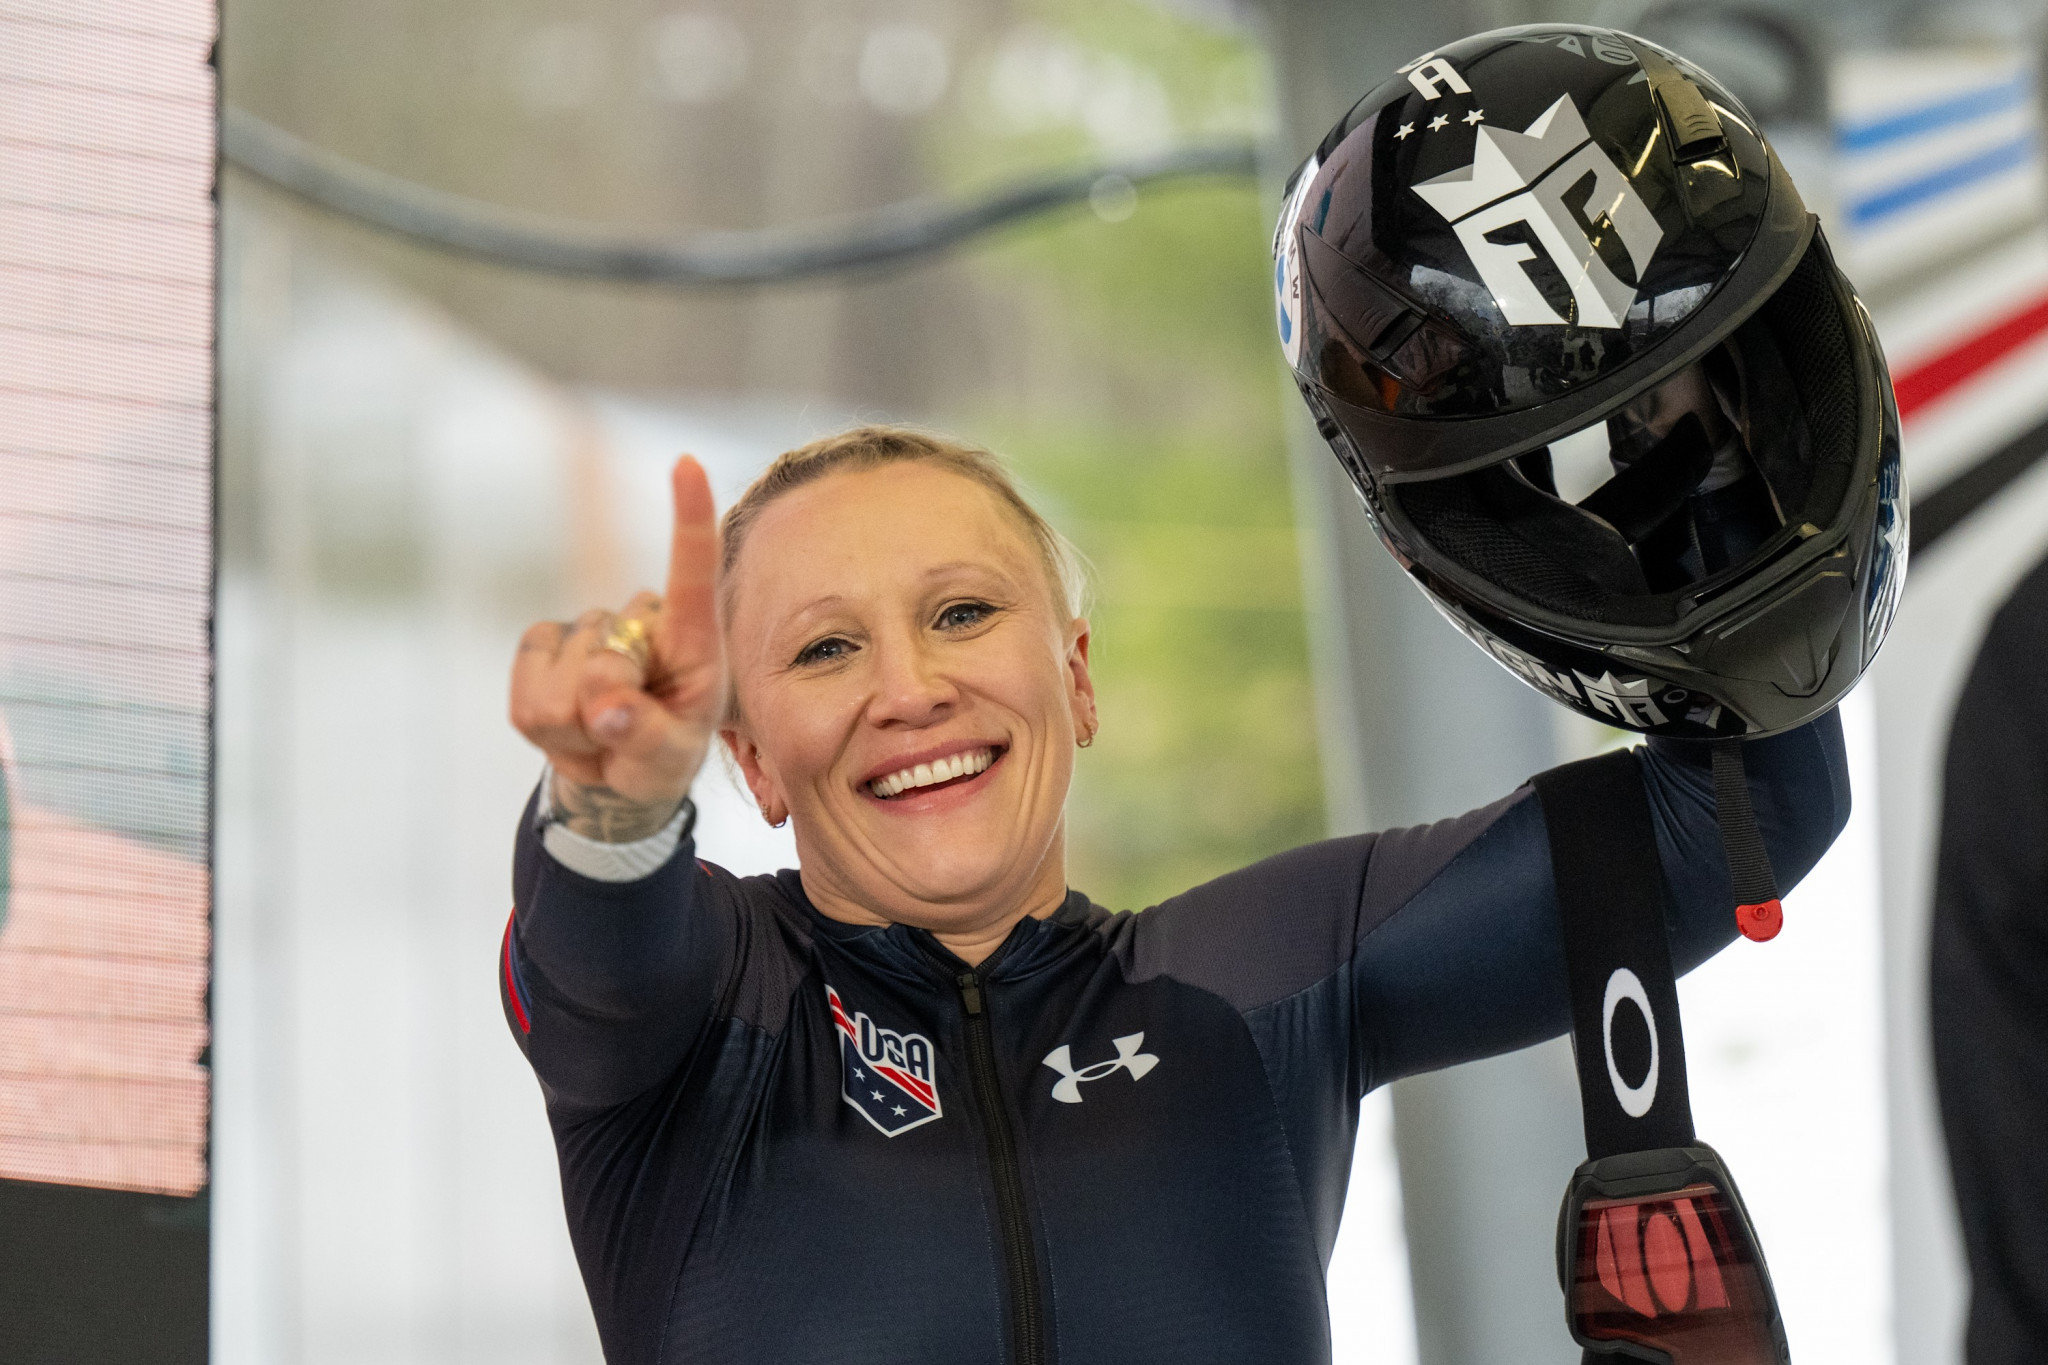 The United States' Kaillie Humphries clinched the women's monobob Crystal Globe in Sigulda ©IBSF